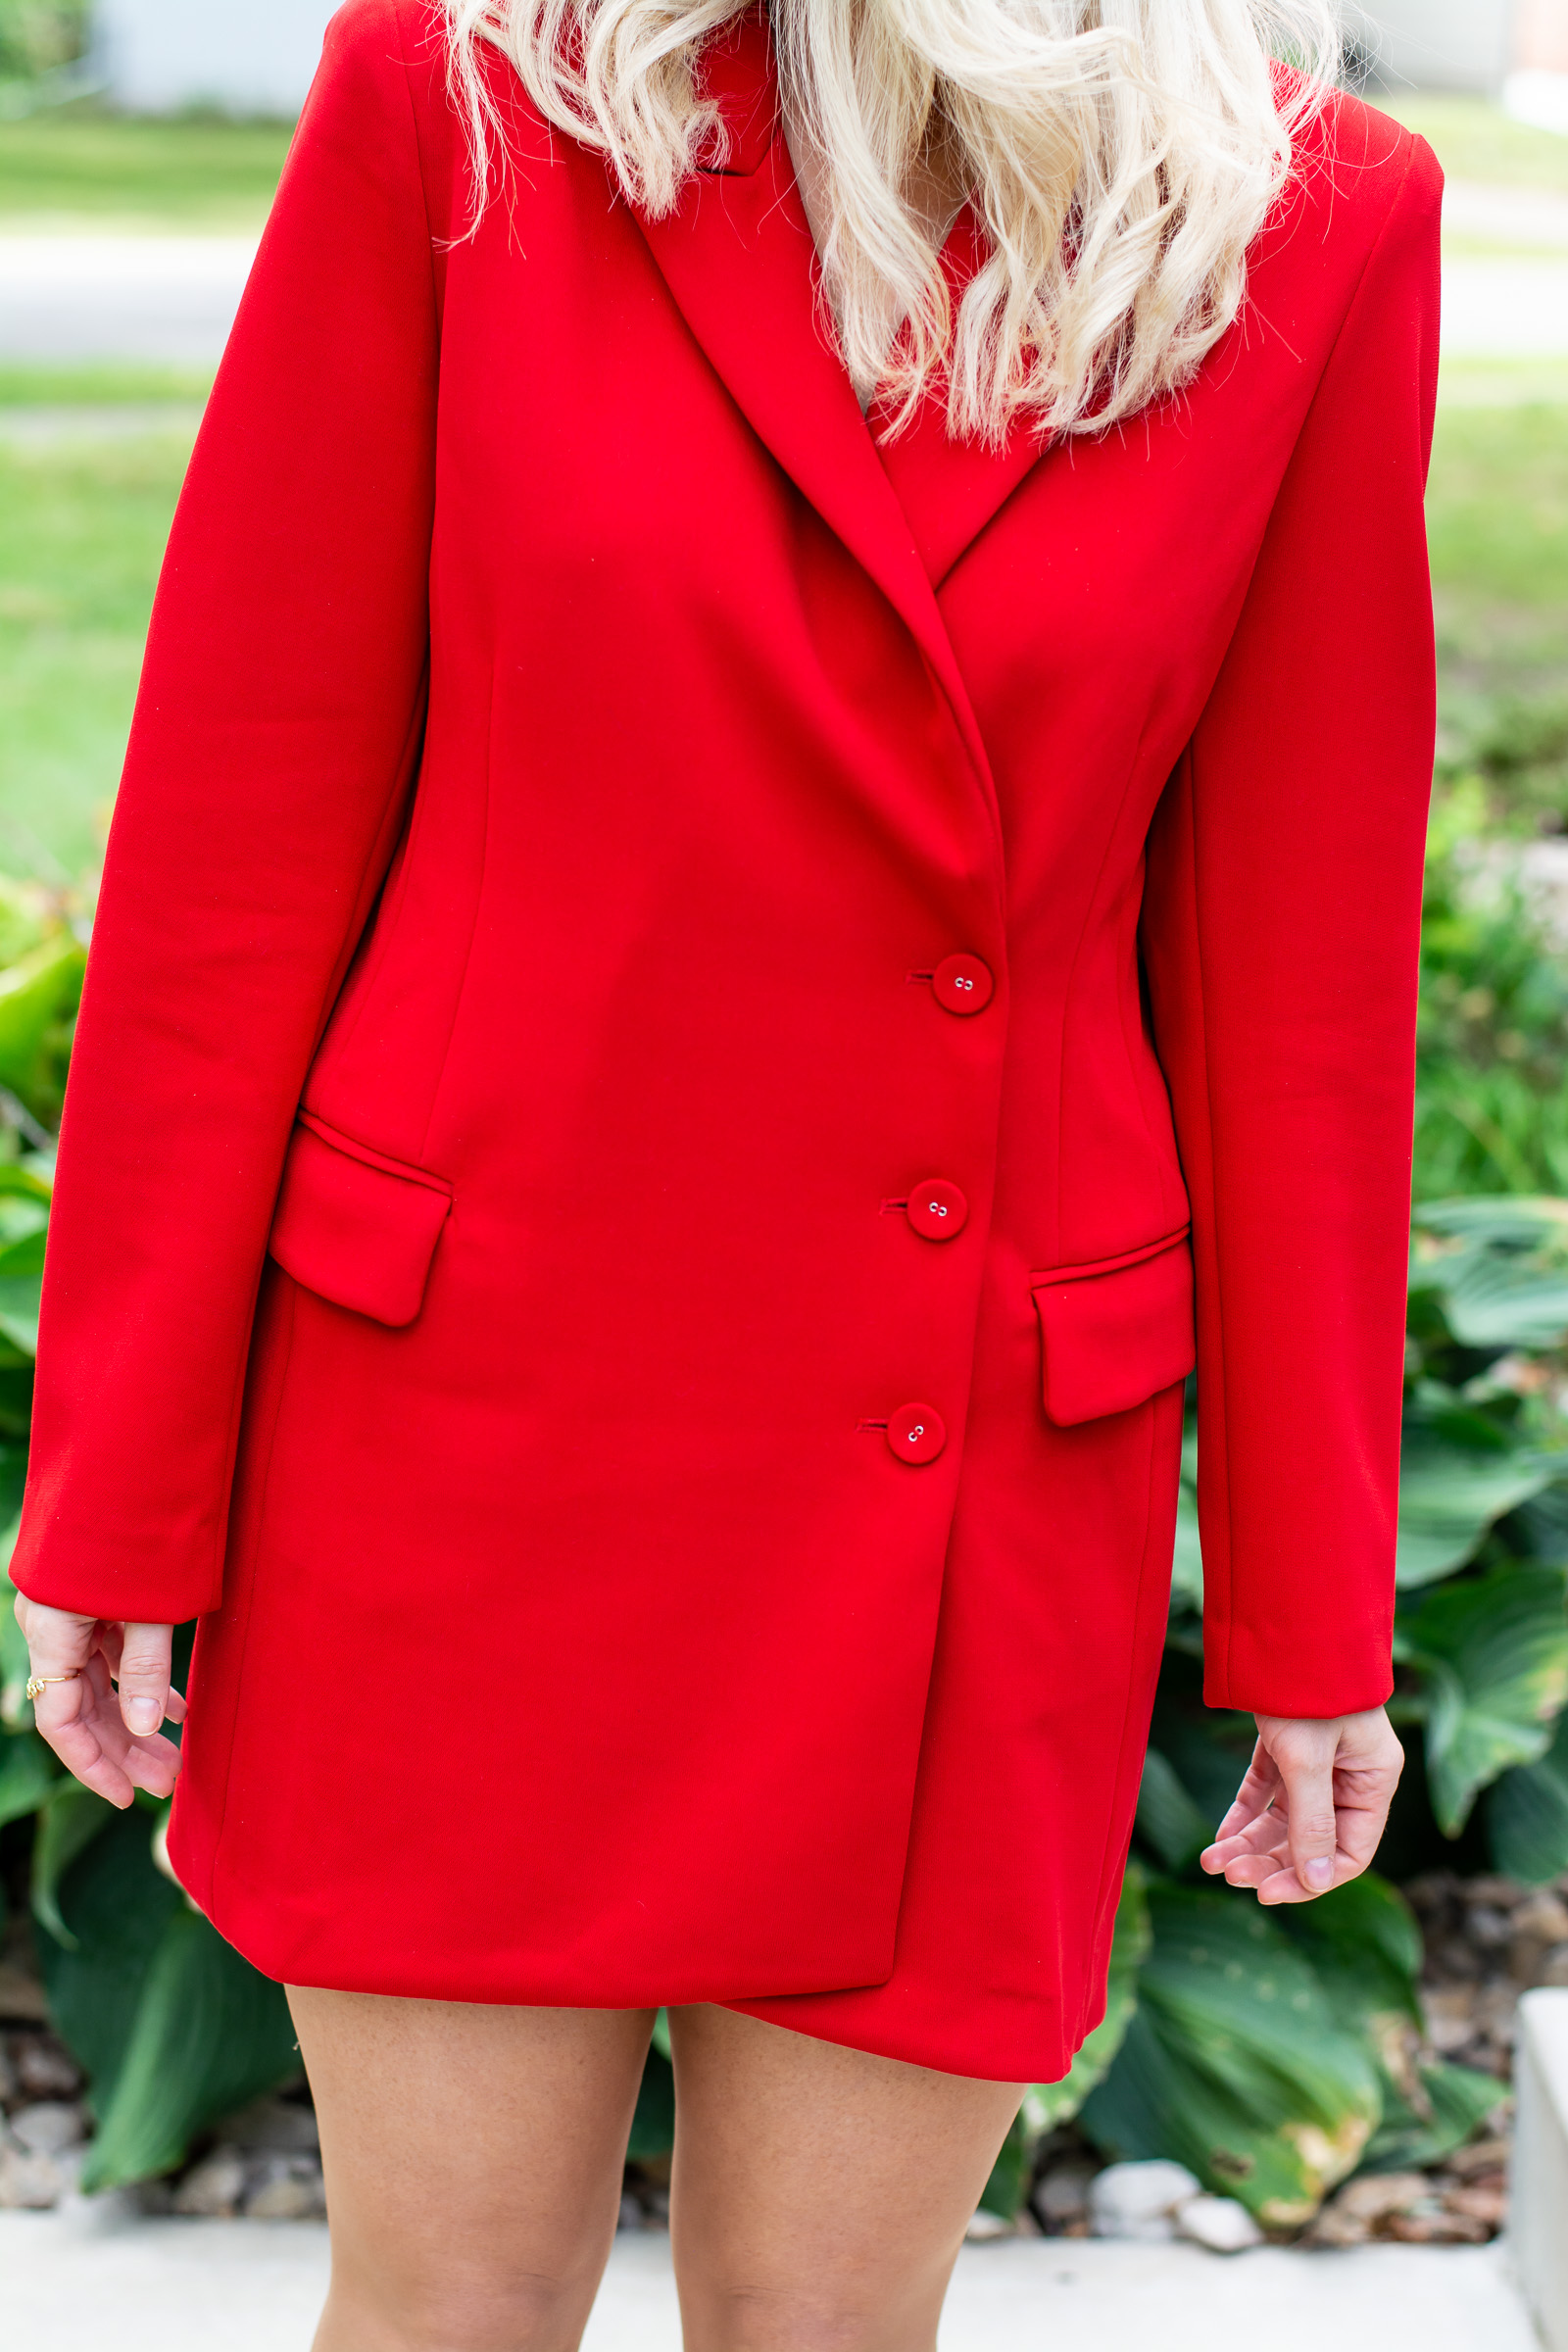 Head-to-toe Red in a Blazer Dress. | Ash from LSR